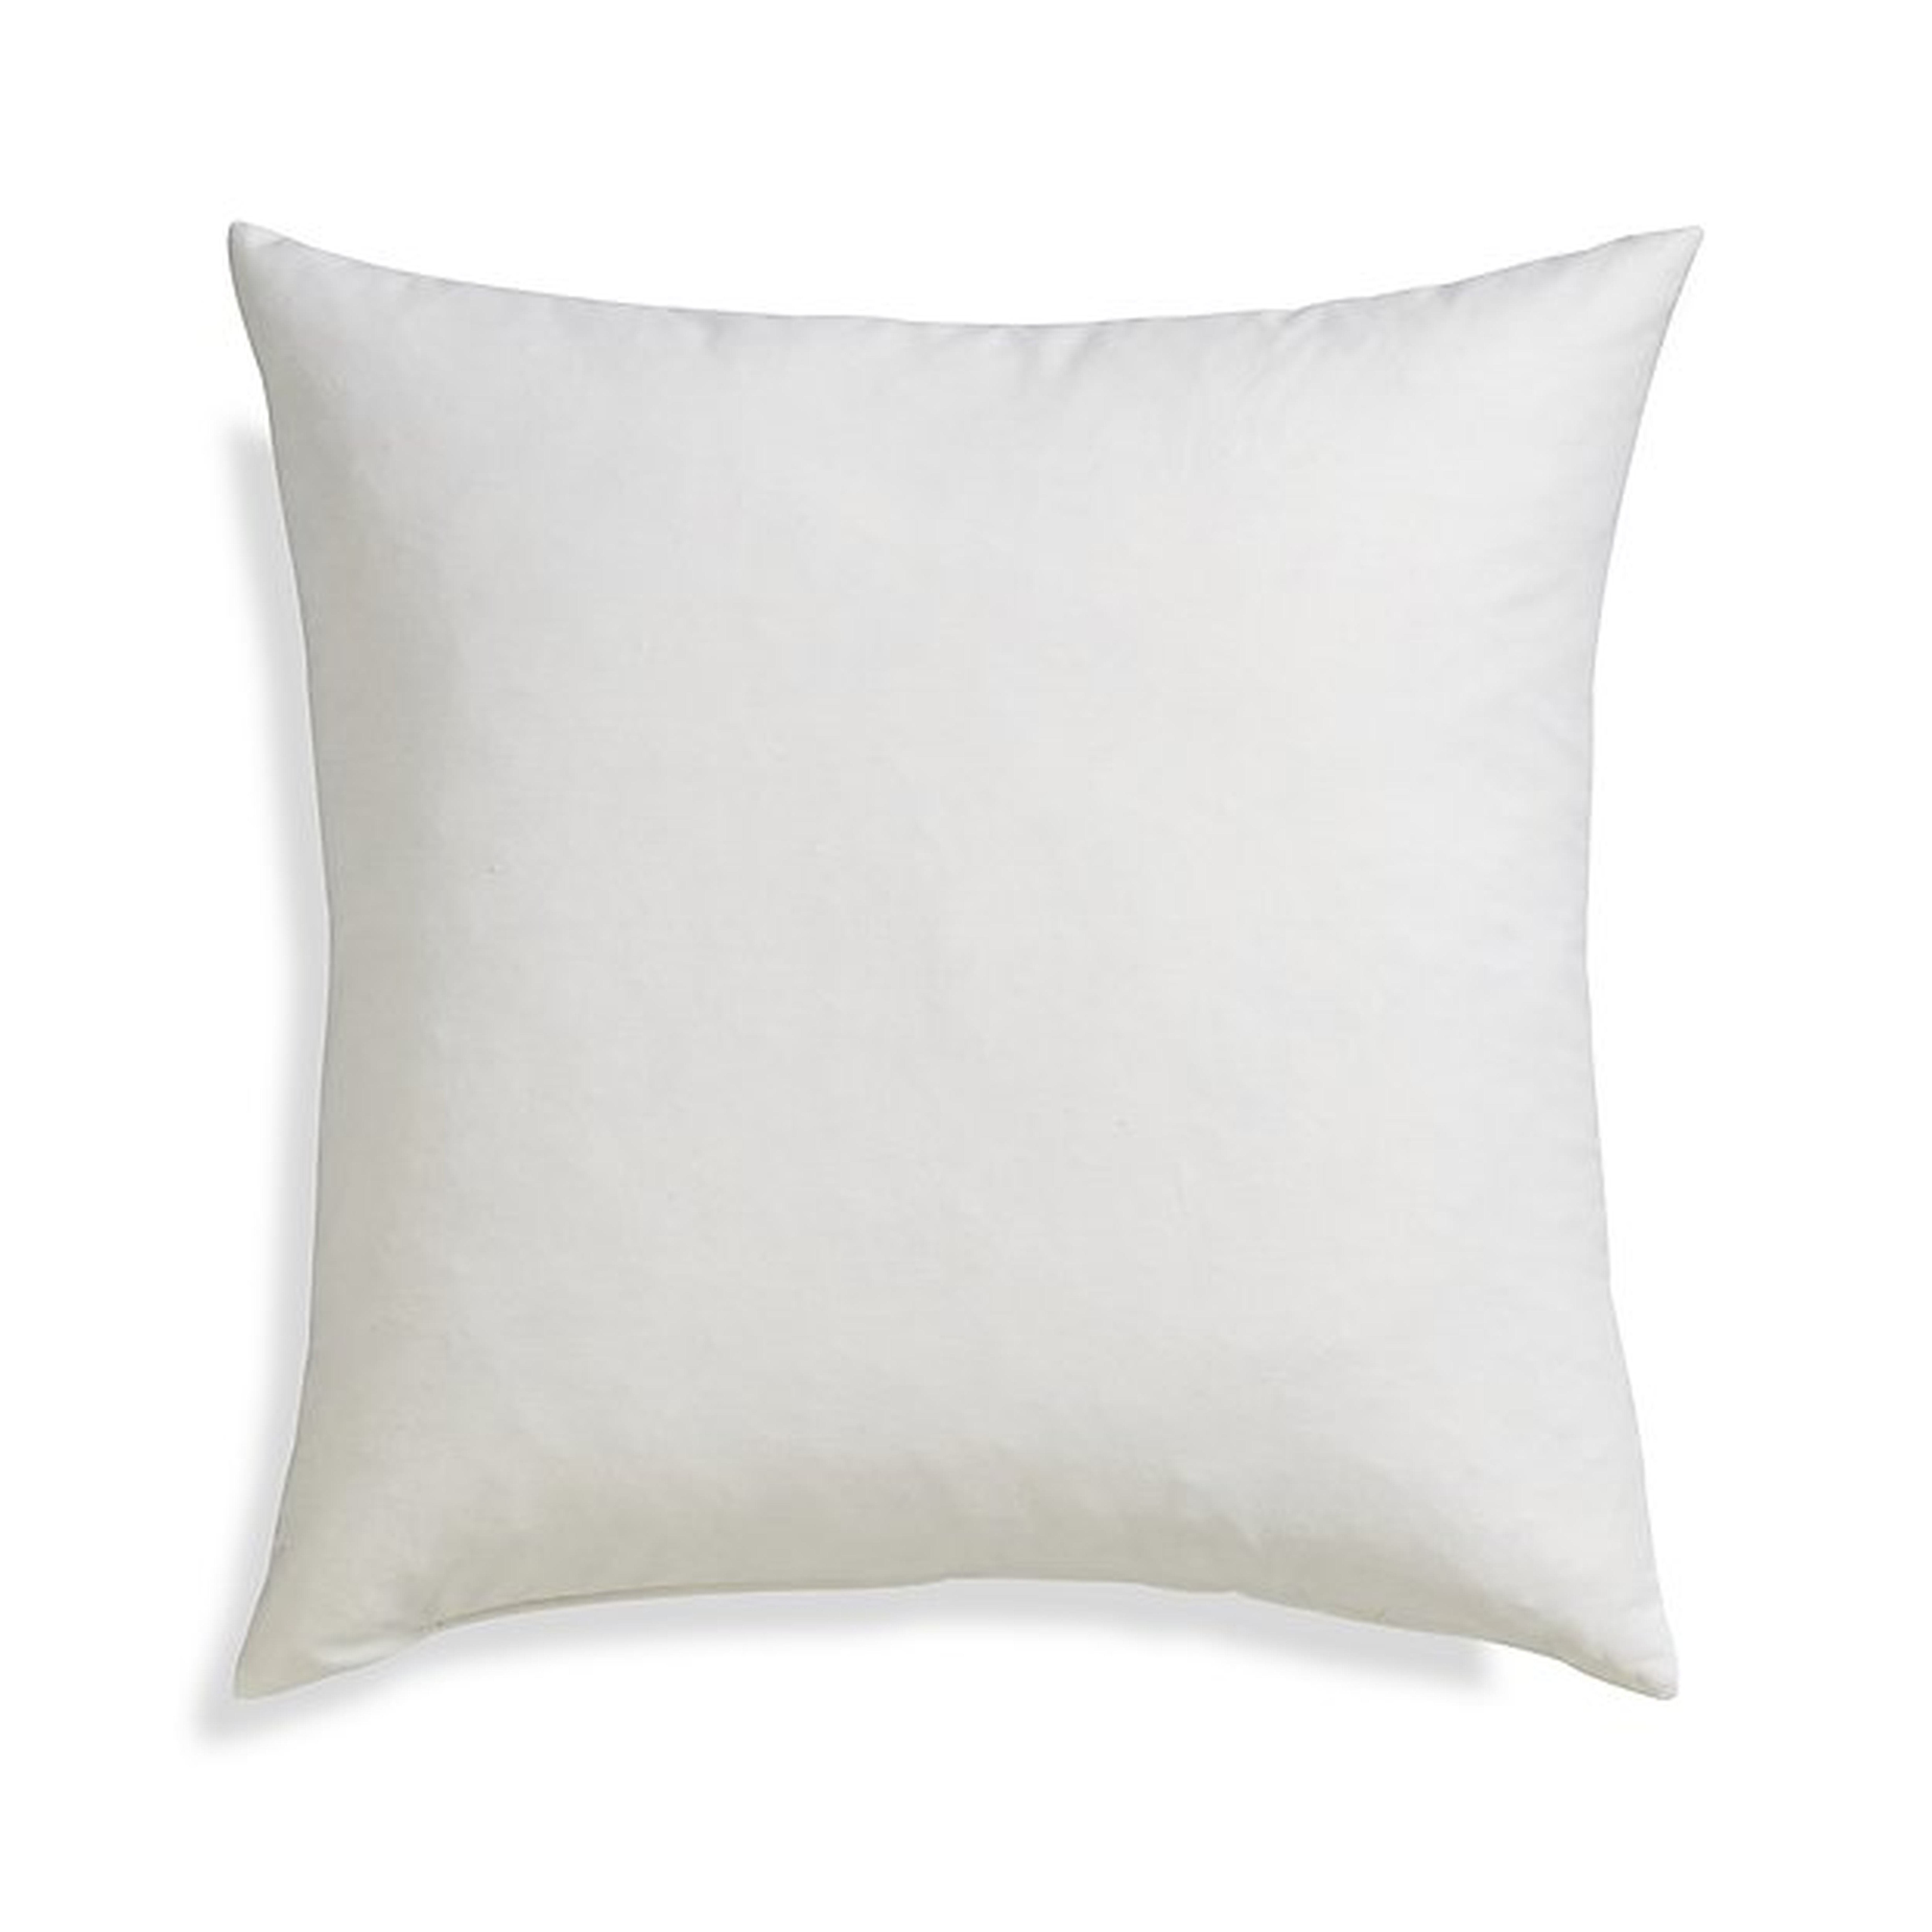 Feather-Down 18" Pillow Insert - Crate and Barrel